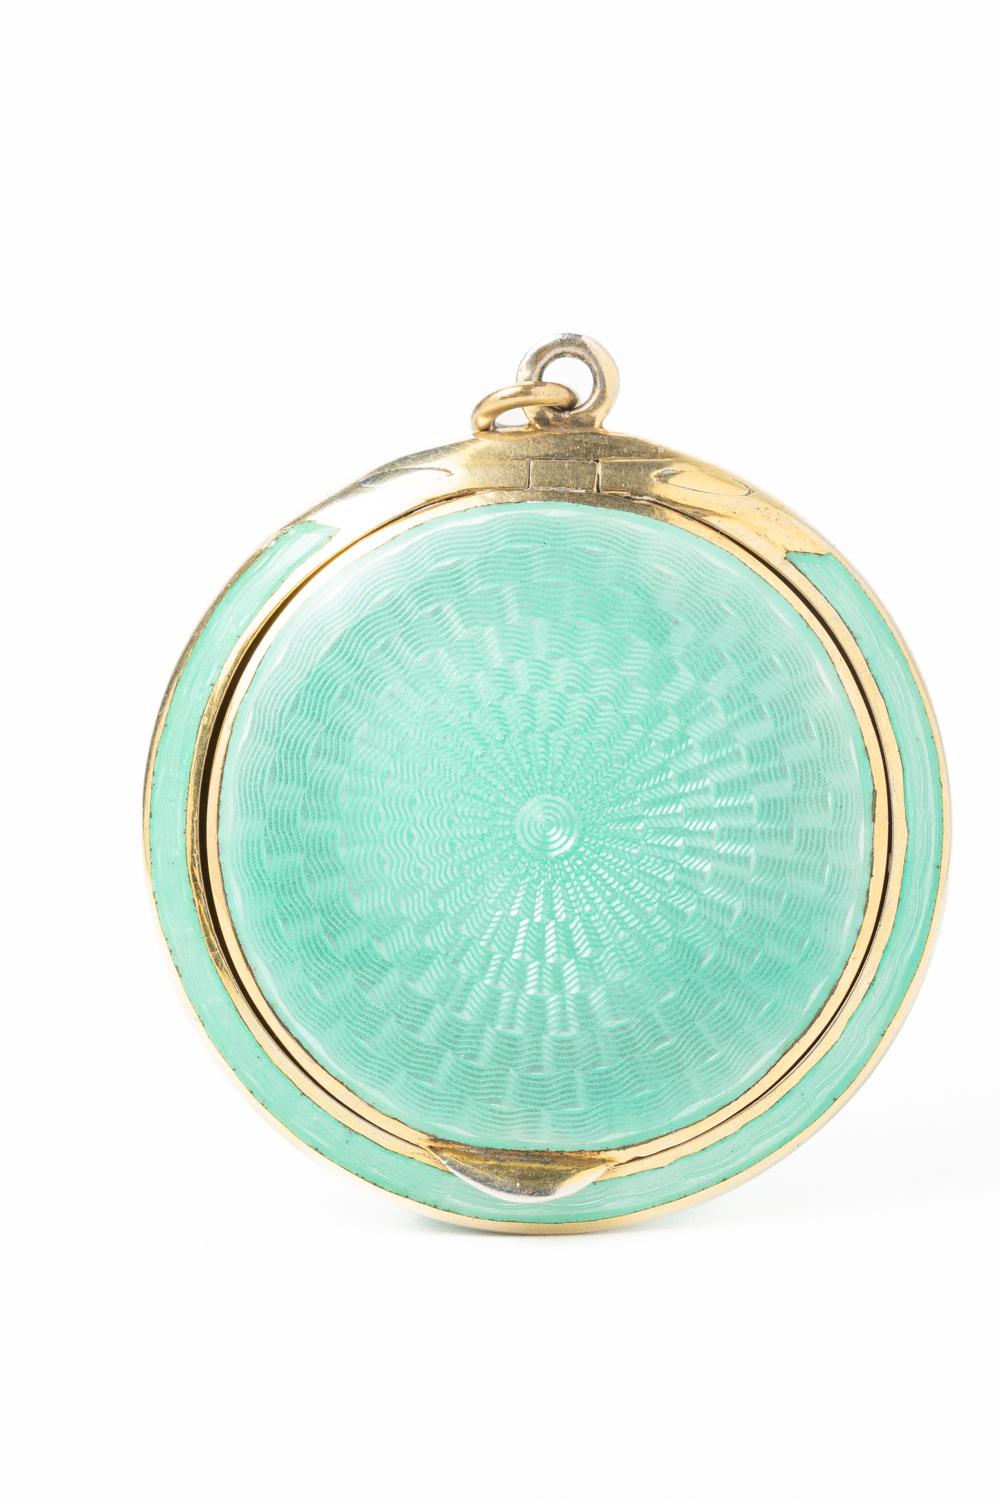 An extraordinary and rare Austrian Art Deco turquoise guilloche enamel and silver gilt mirror oval locket. This stunning piece is made in a striking and vibrant turquoise/mint guilloche enamel with a silver gilded interior and is dated 1924. The